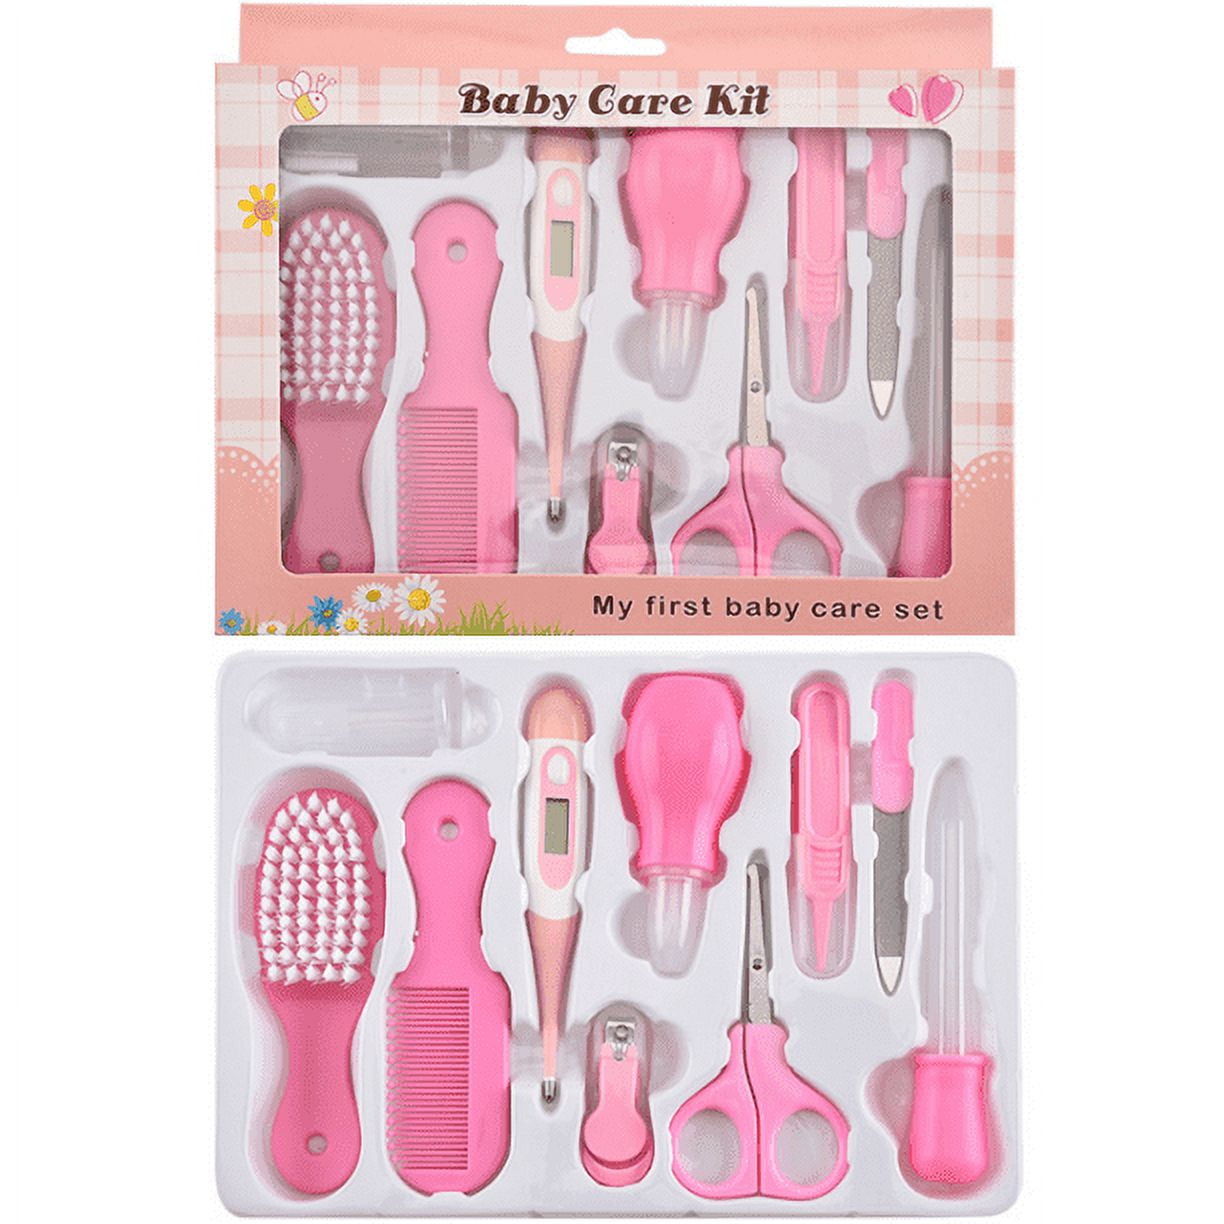 KailexBaby Portable Baby Healthcare and Grooming Kit, Nail Clippers, Hair  Brush, Comb, Scissors for Girls - Pink 